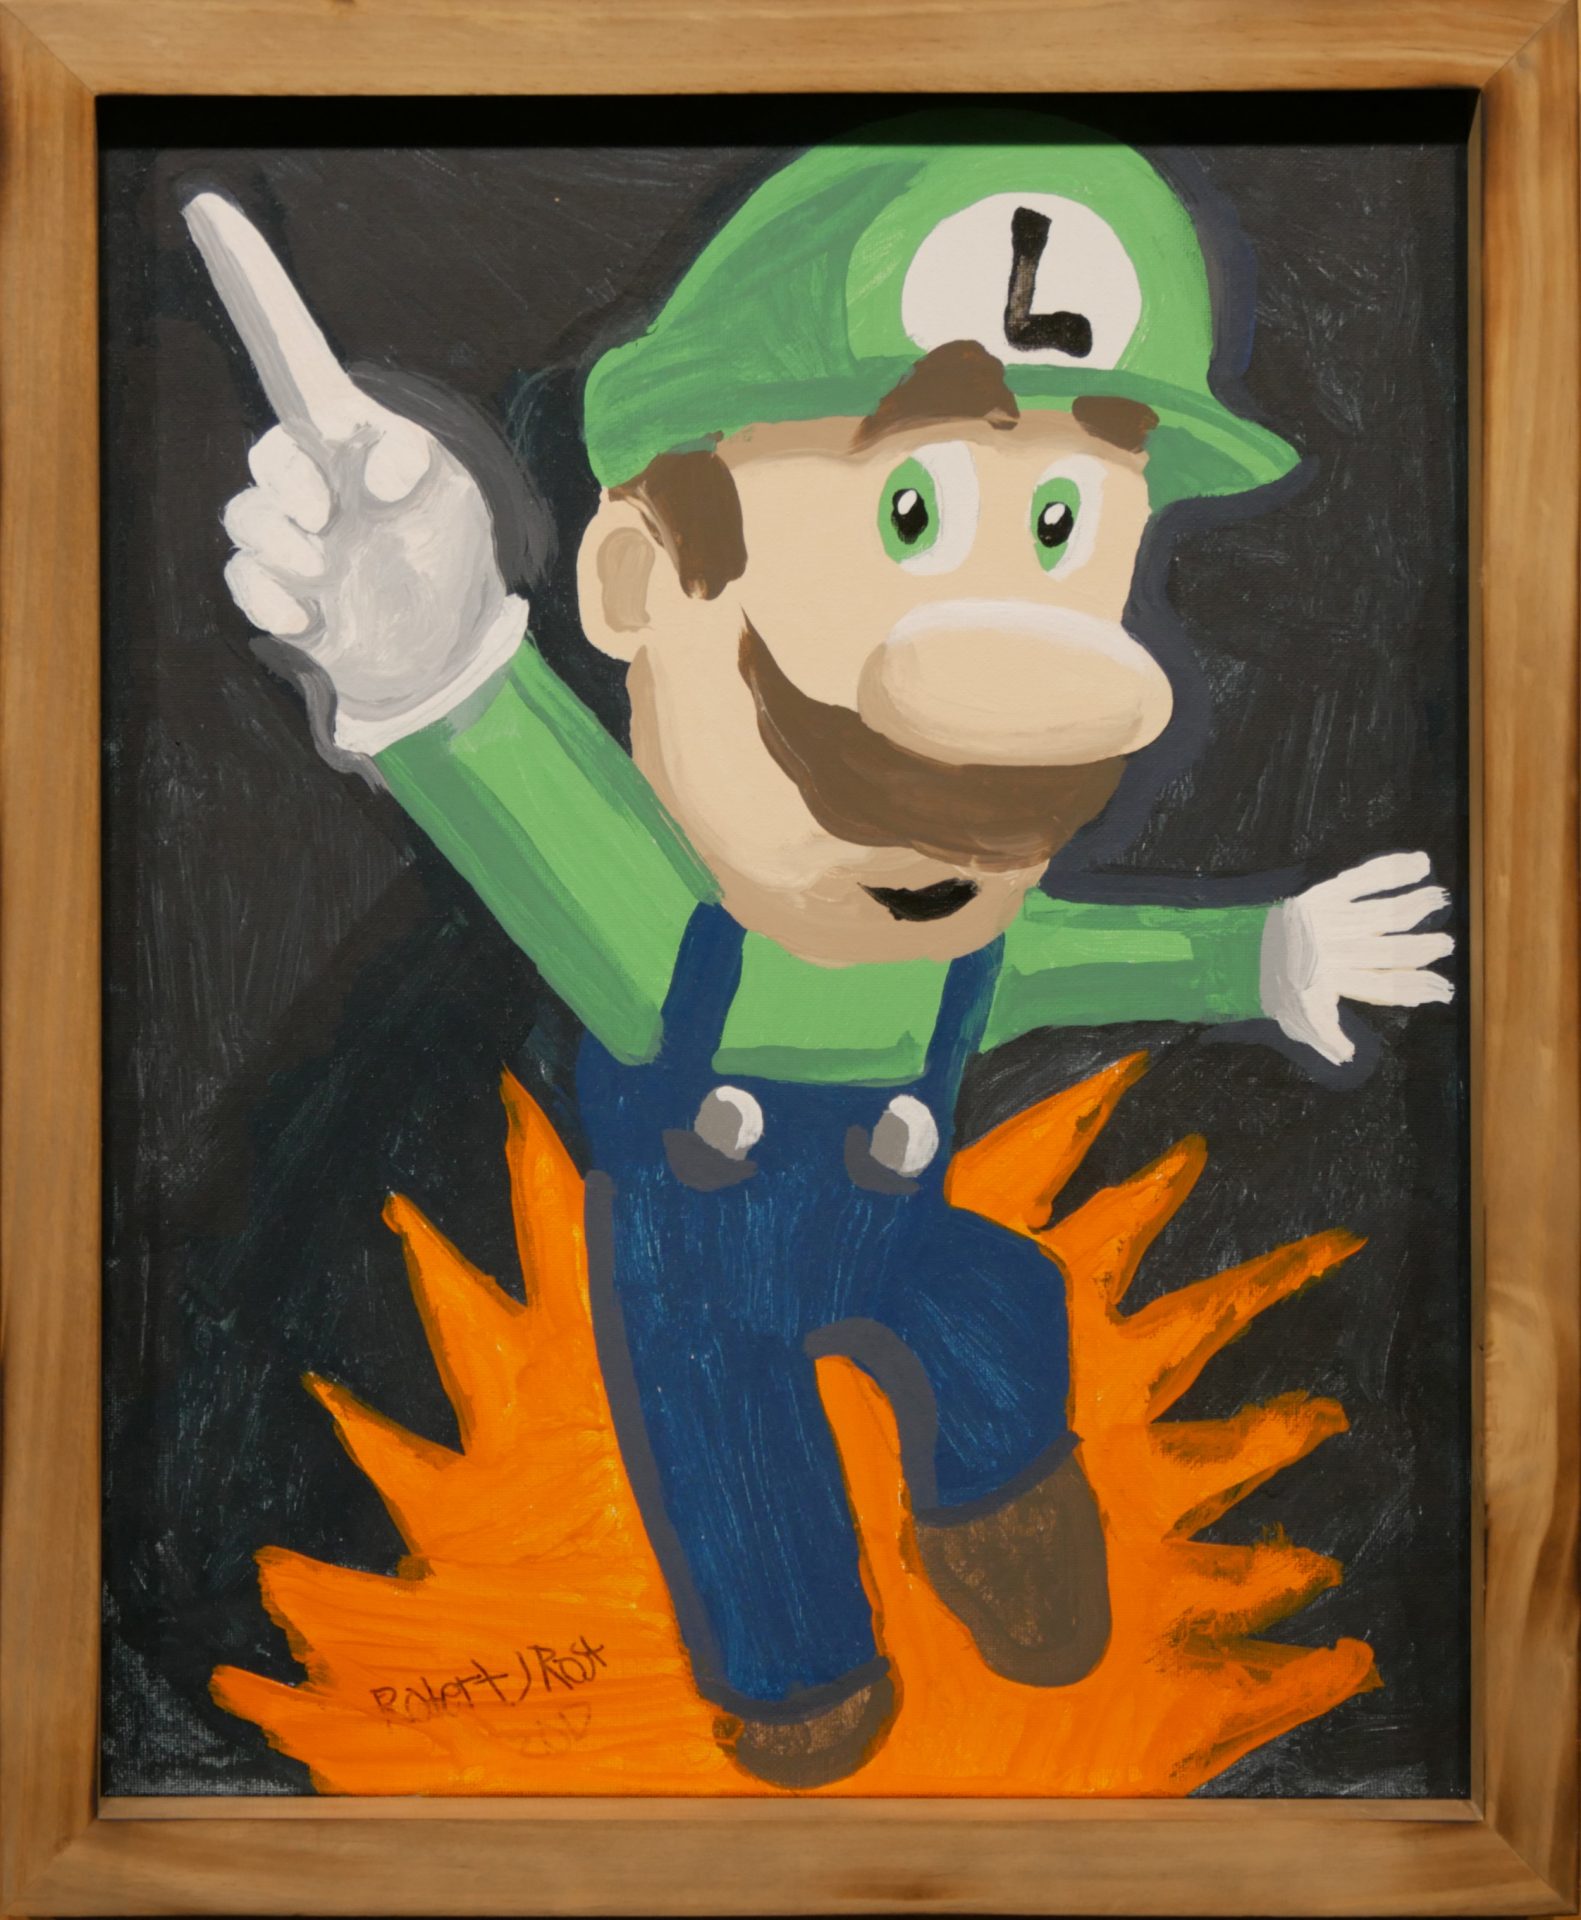 'And Luigi' by Robby Rost (acrylic on canvas)